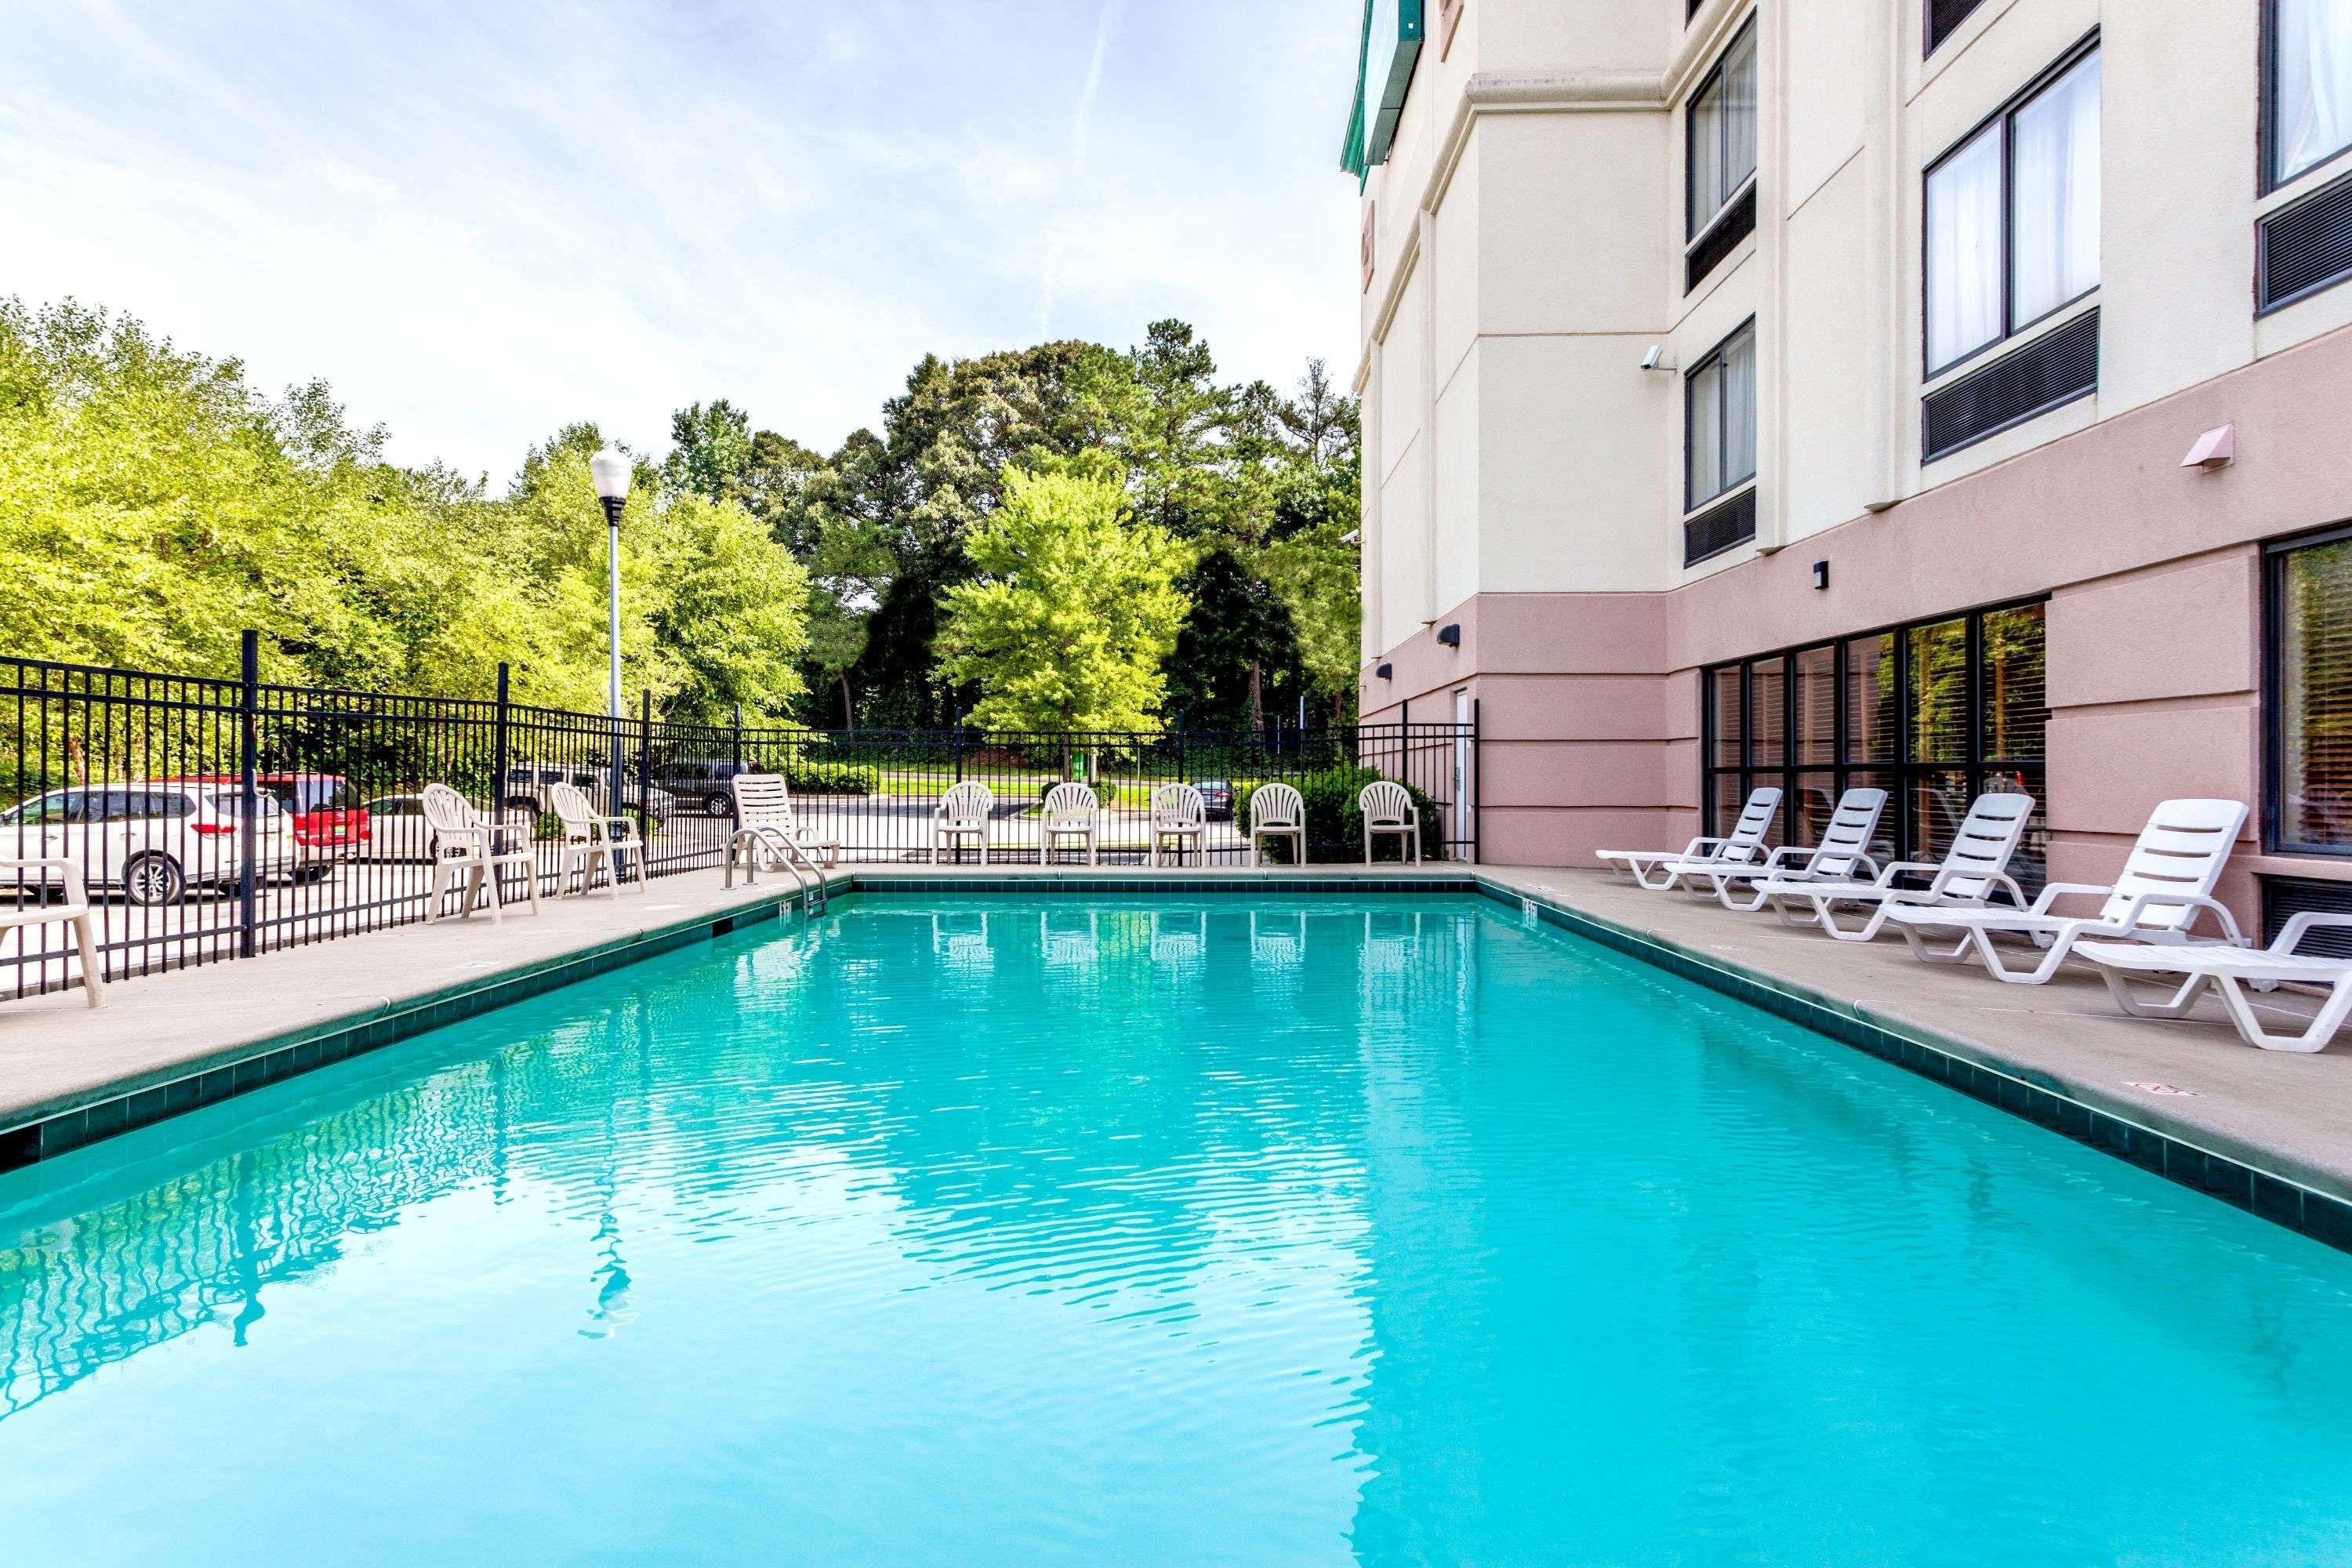 Wingate By Wyndham Atlanta/Six Flags Austell Hotel Exterior photo